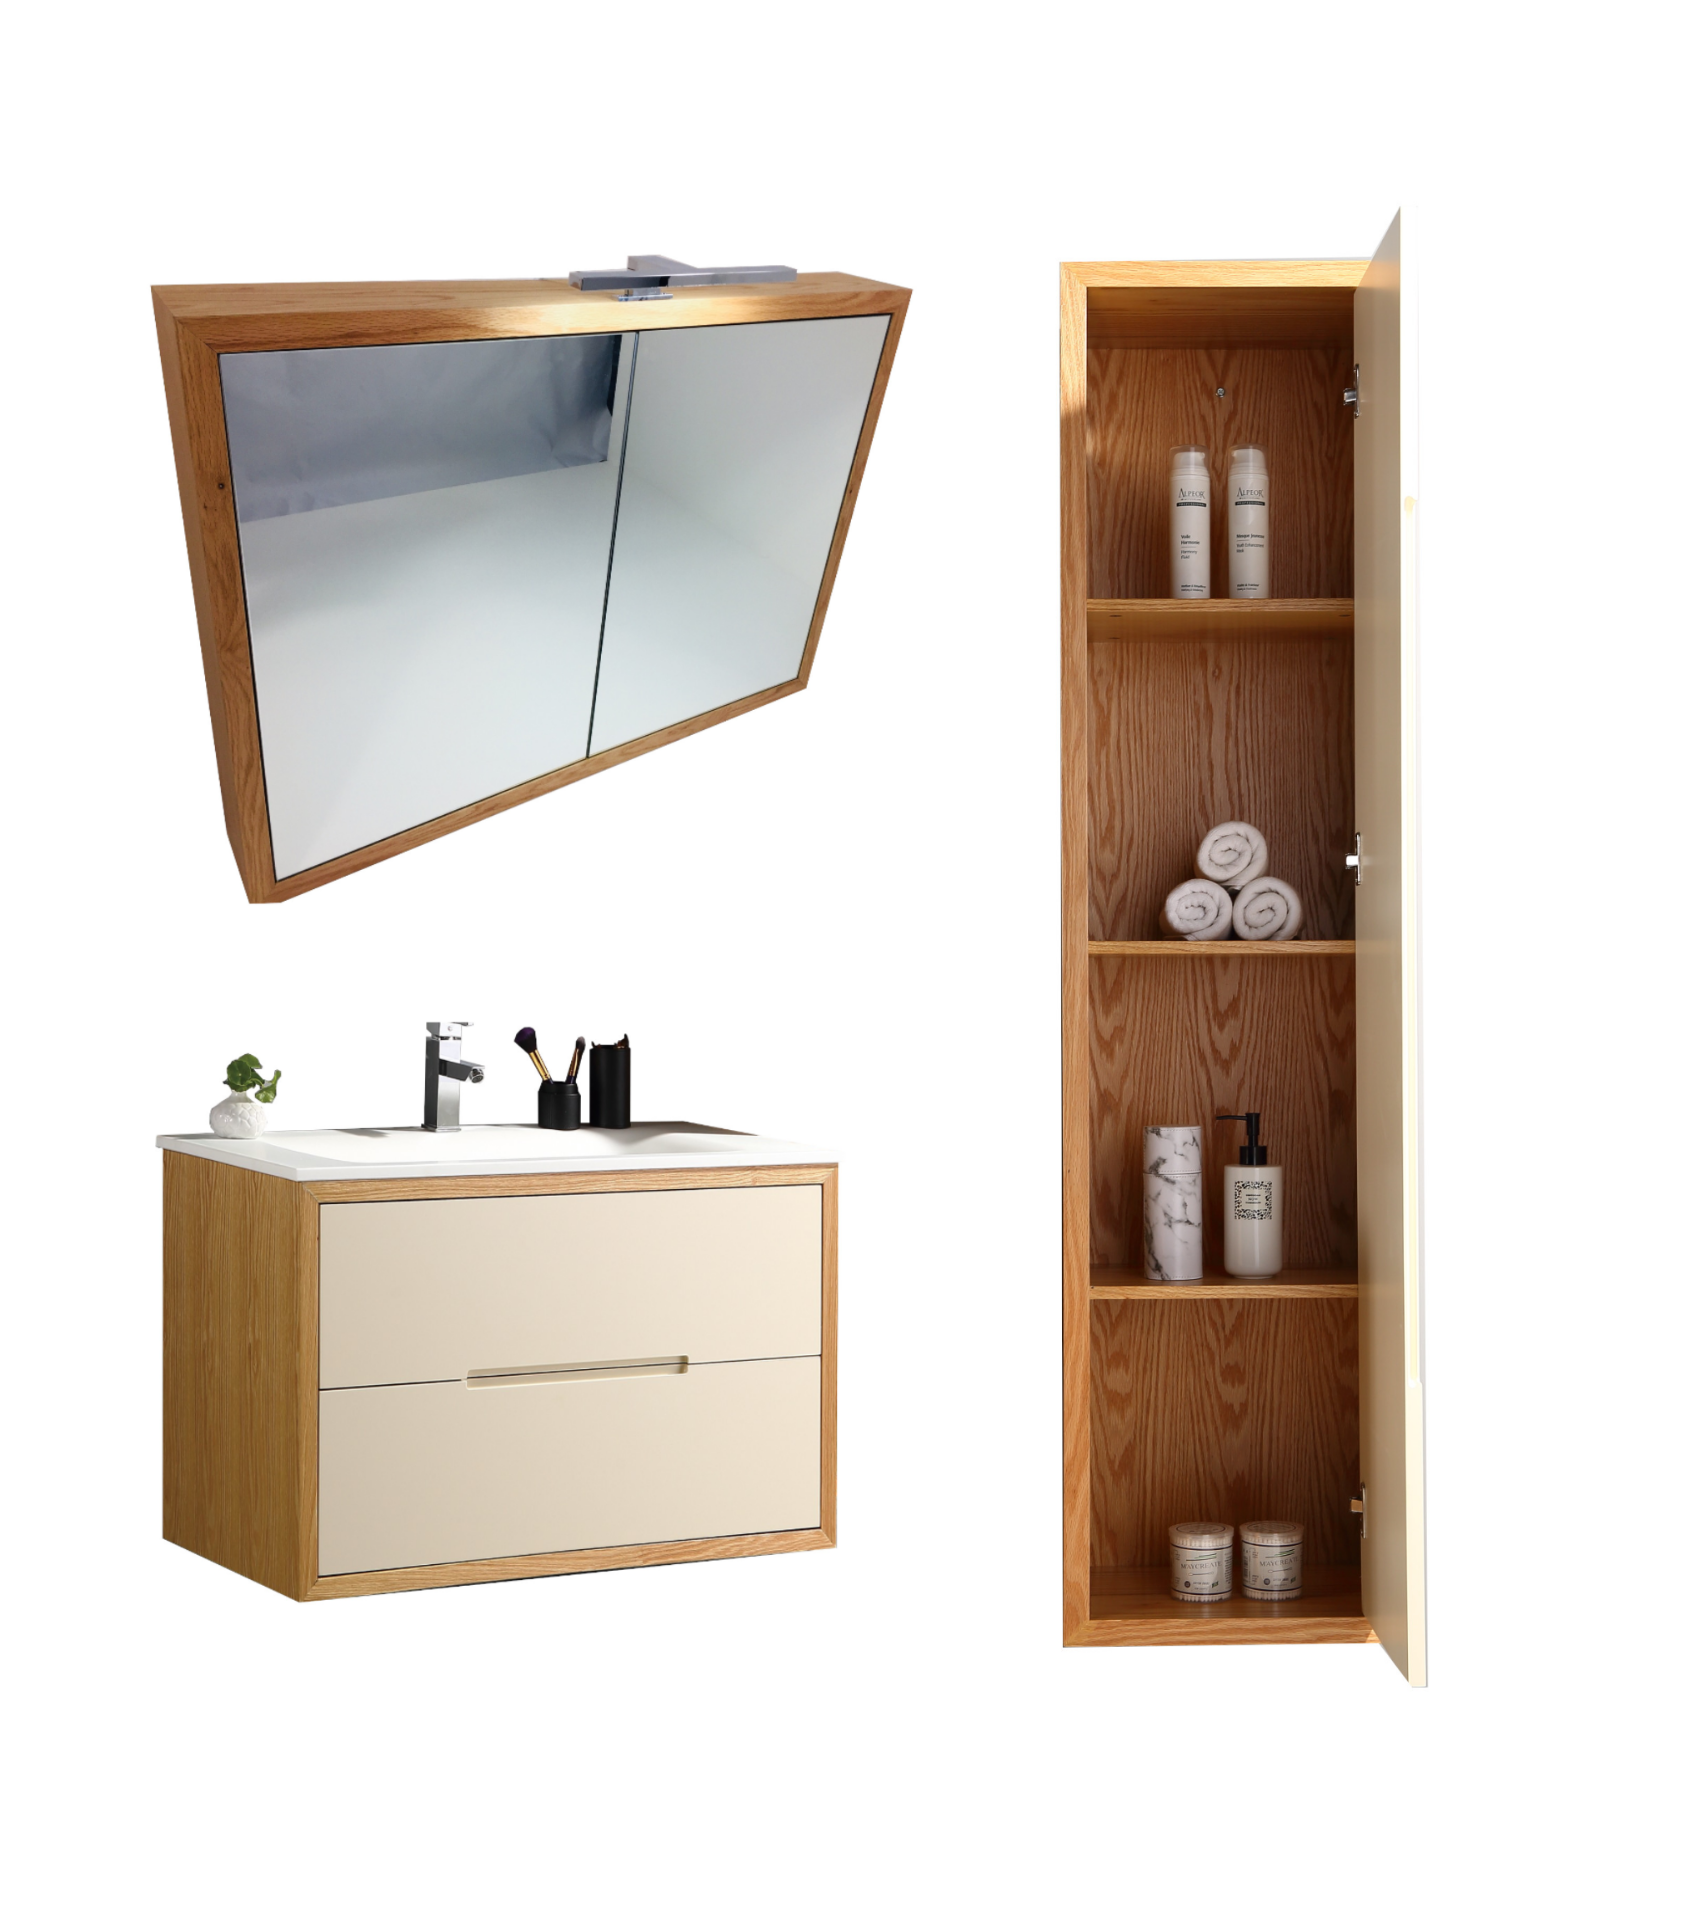 BRAND NEW Complete Vanity Unit Set in Beige with fixtures and fittings RRP £999.99 *NO VAT* - Image 3 of 5